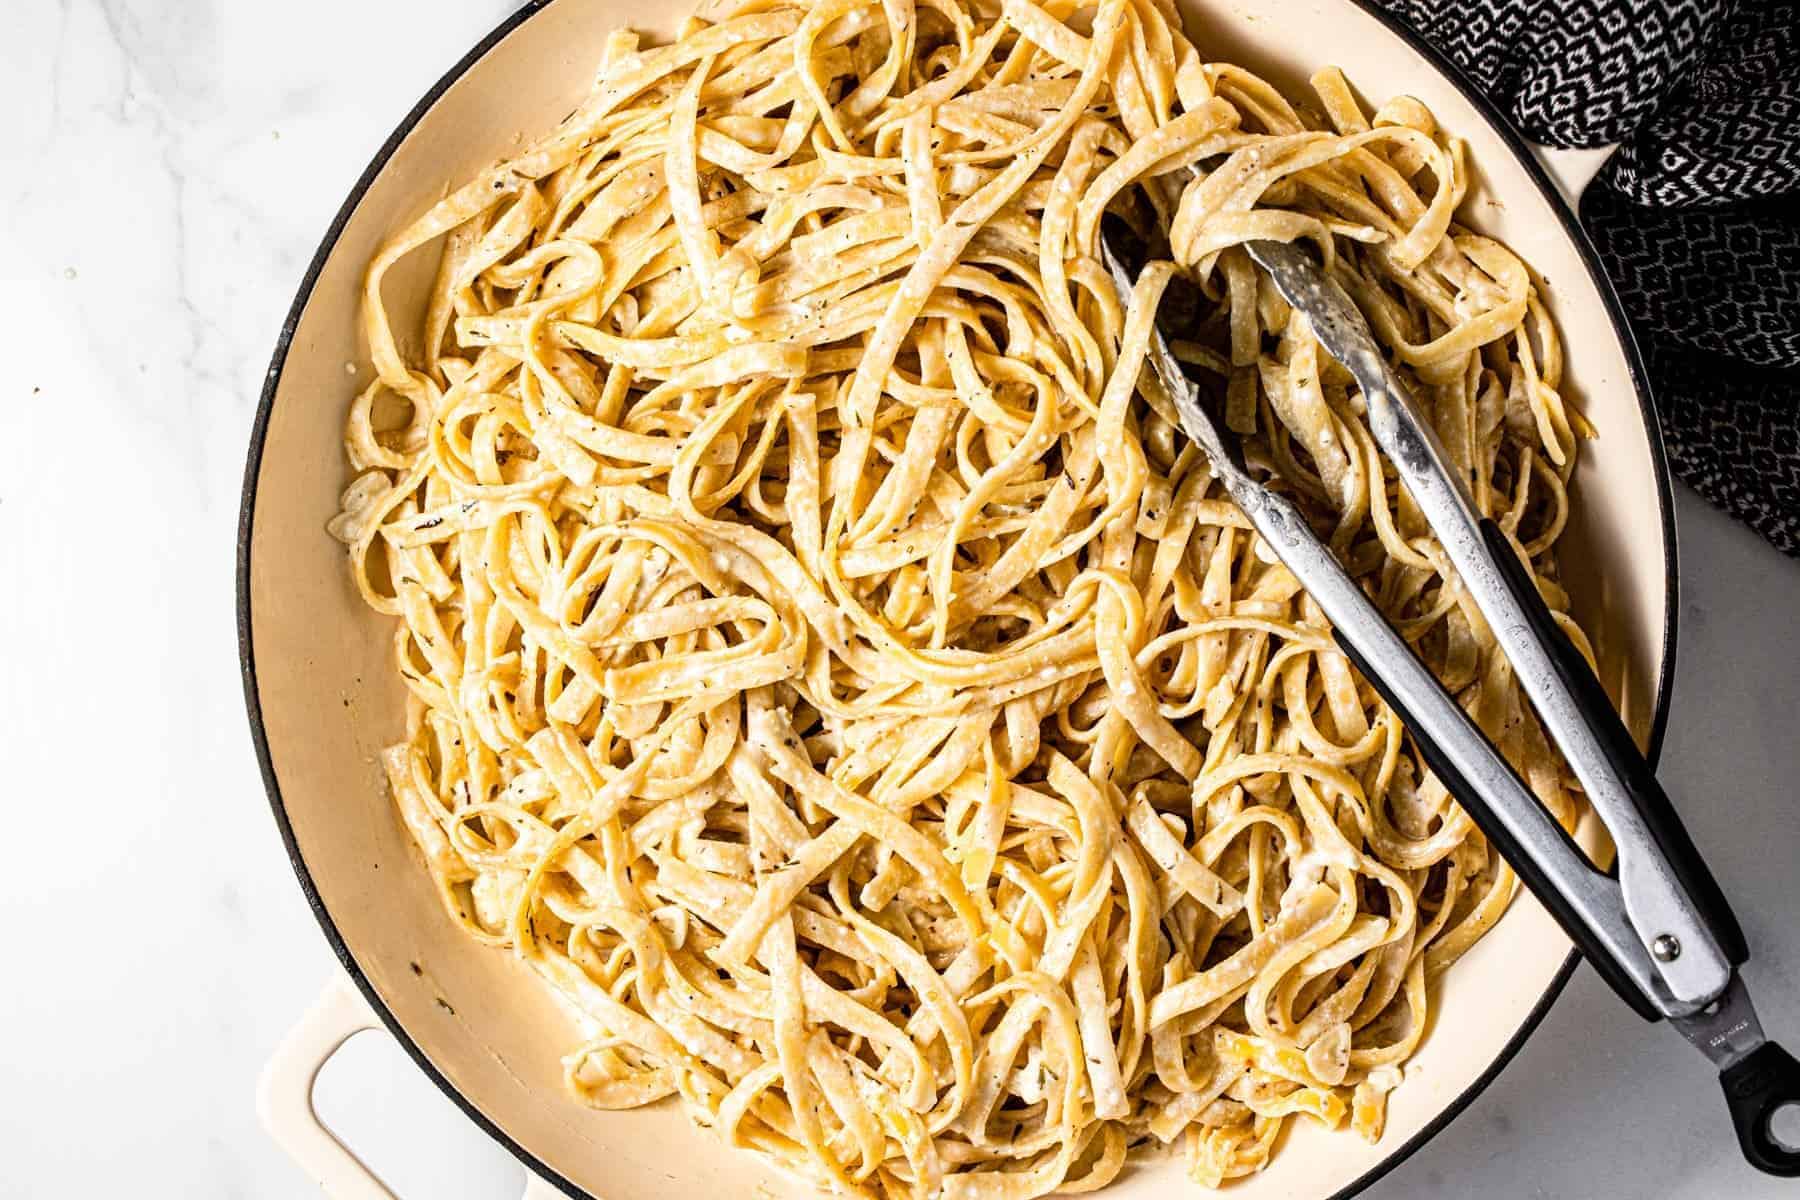 Large white pan filled with fettuccine pasta tossed in a creamy herb feta sauce